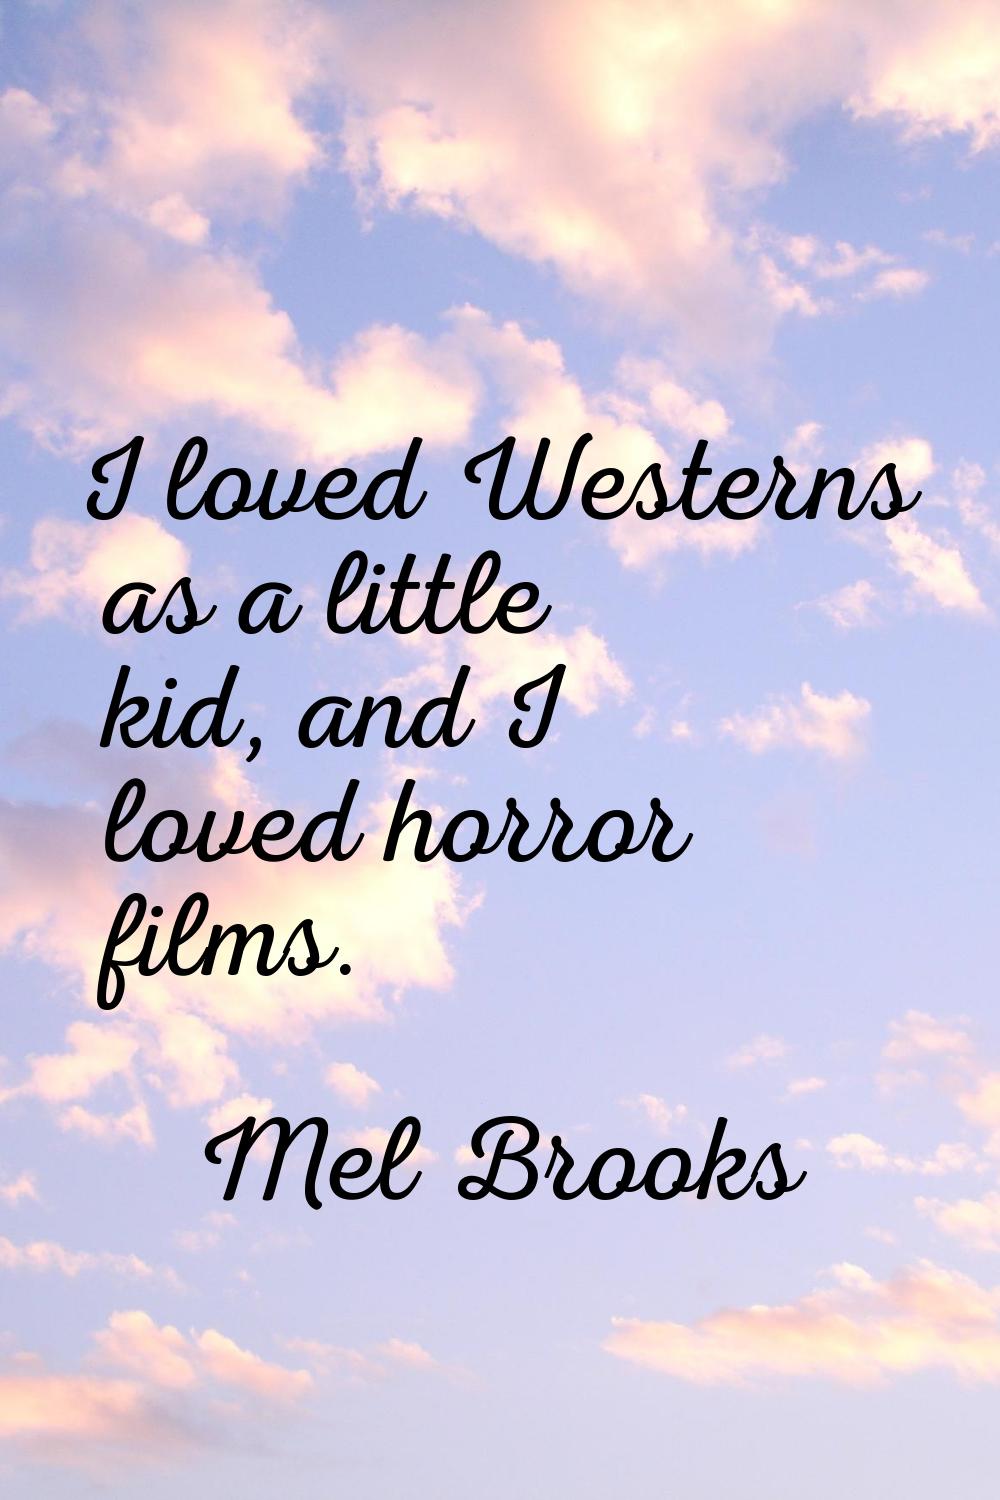 I loved Westerns as a little kid, and I loved horror films.